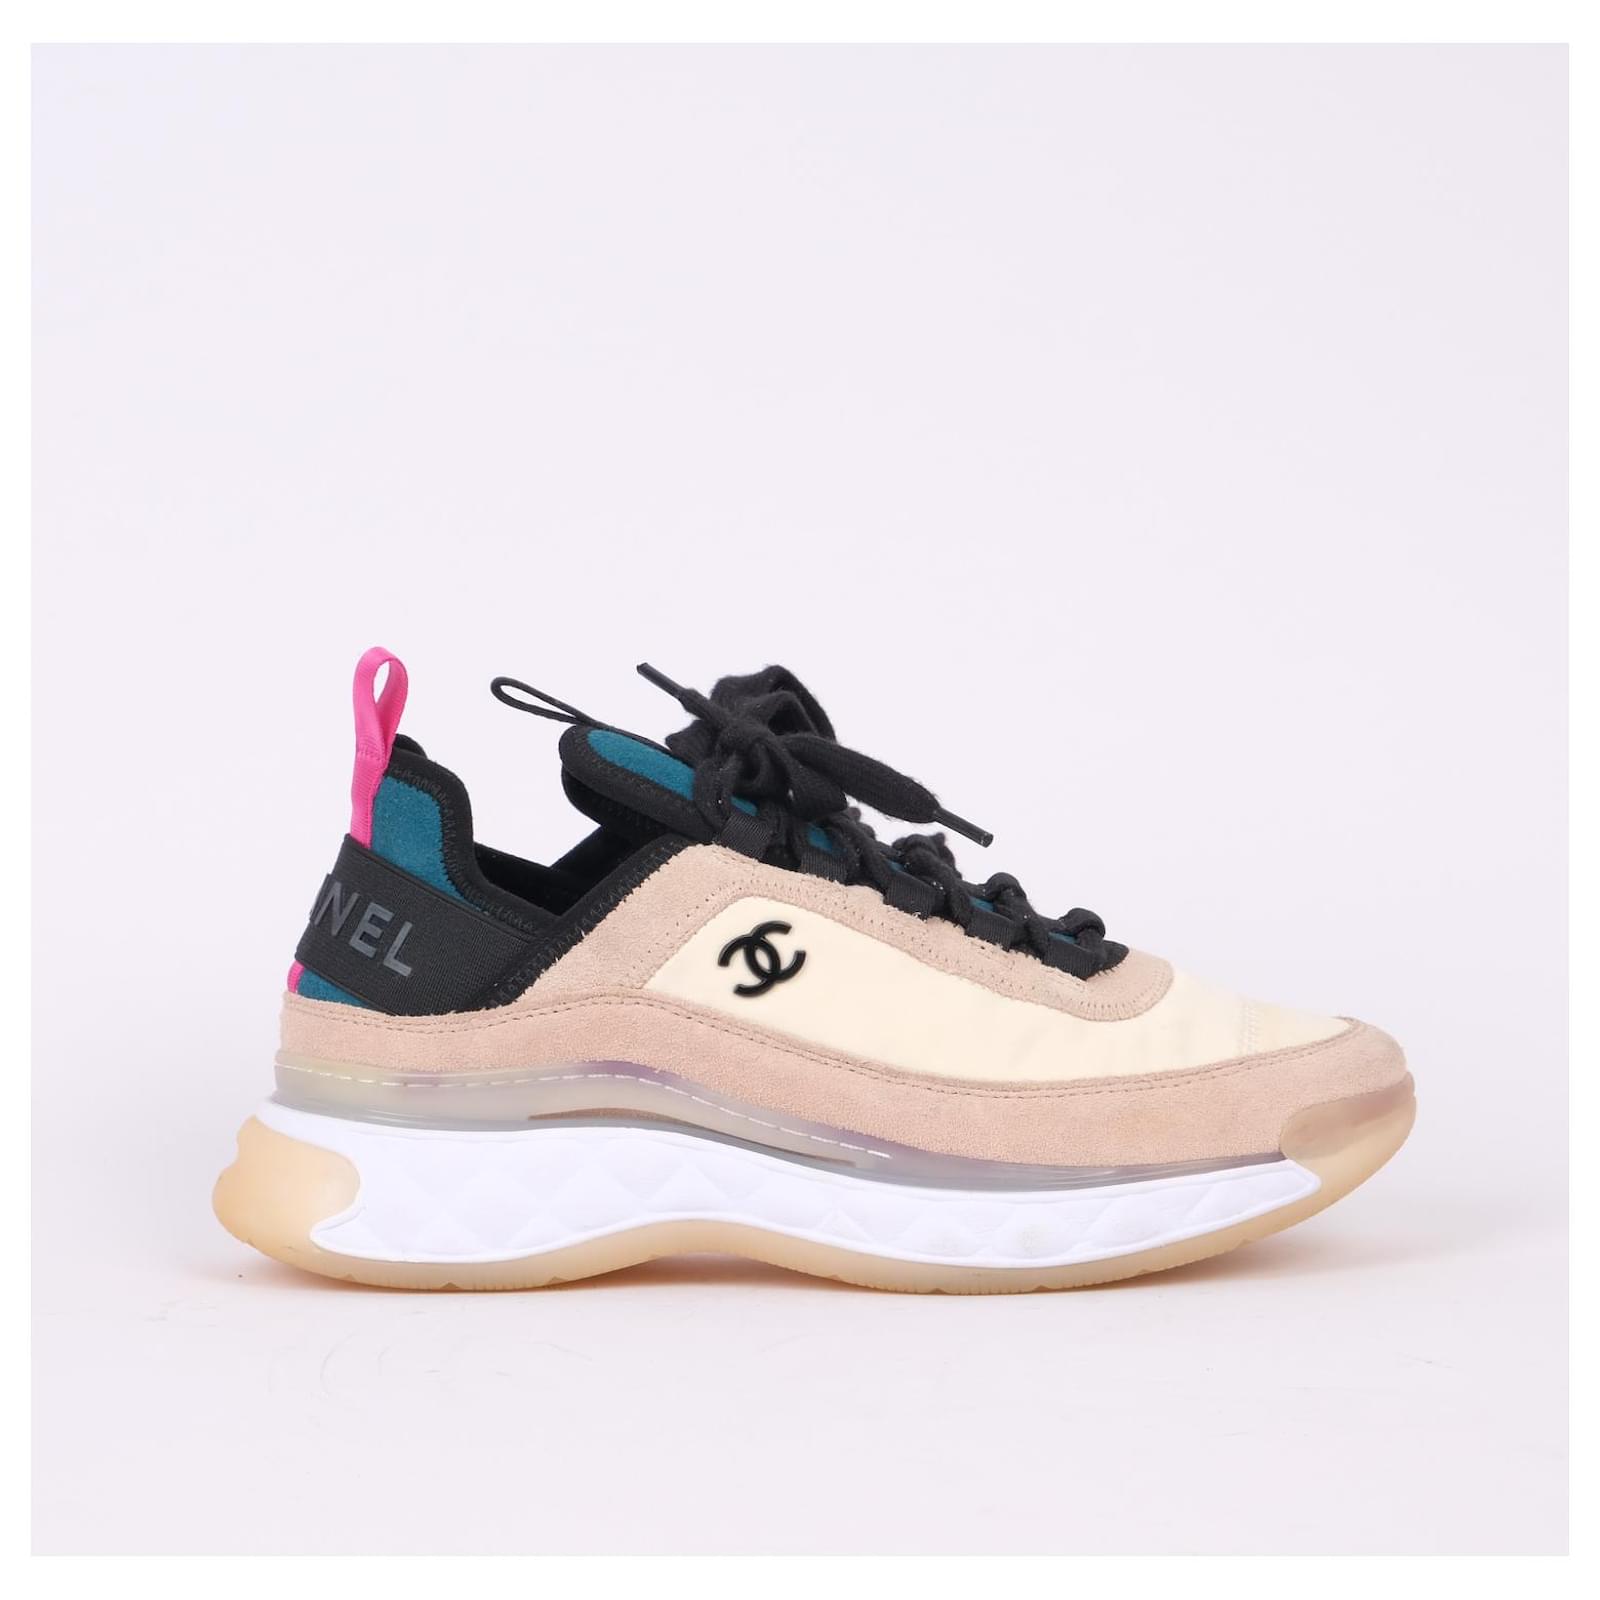 Chanel Multicolor Knit Fabric and Suede CC Sneakers Size 37.5 Chanel